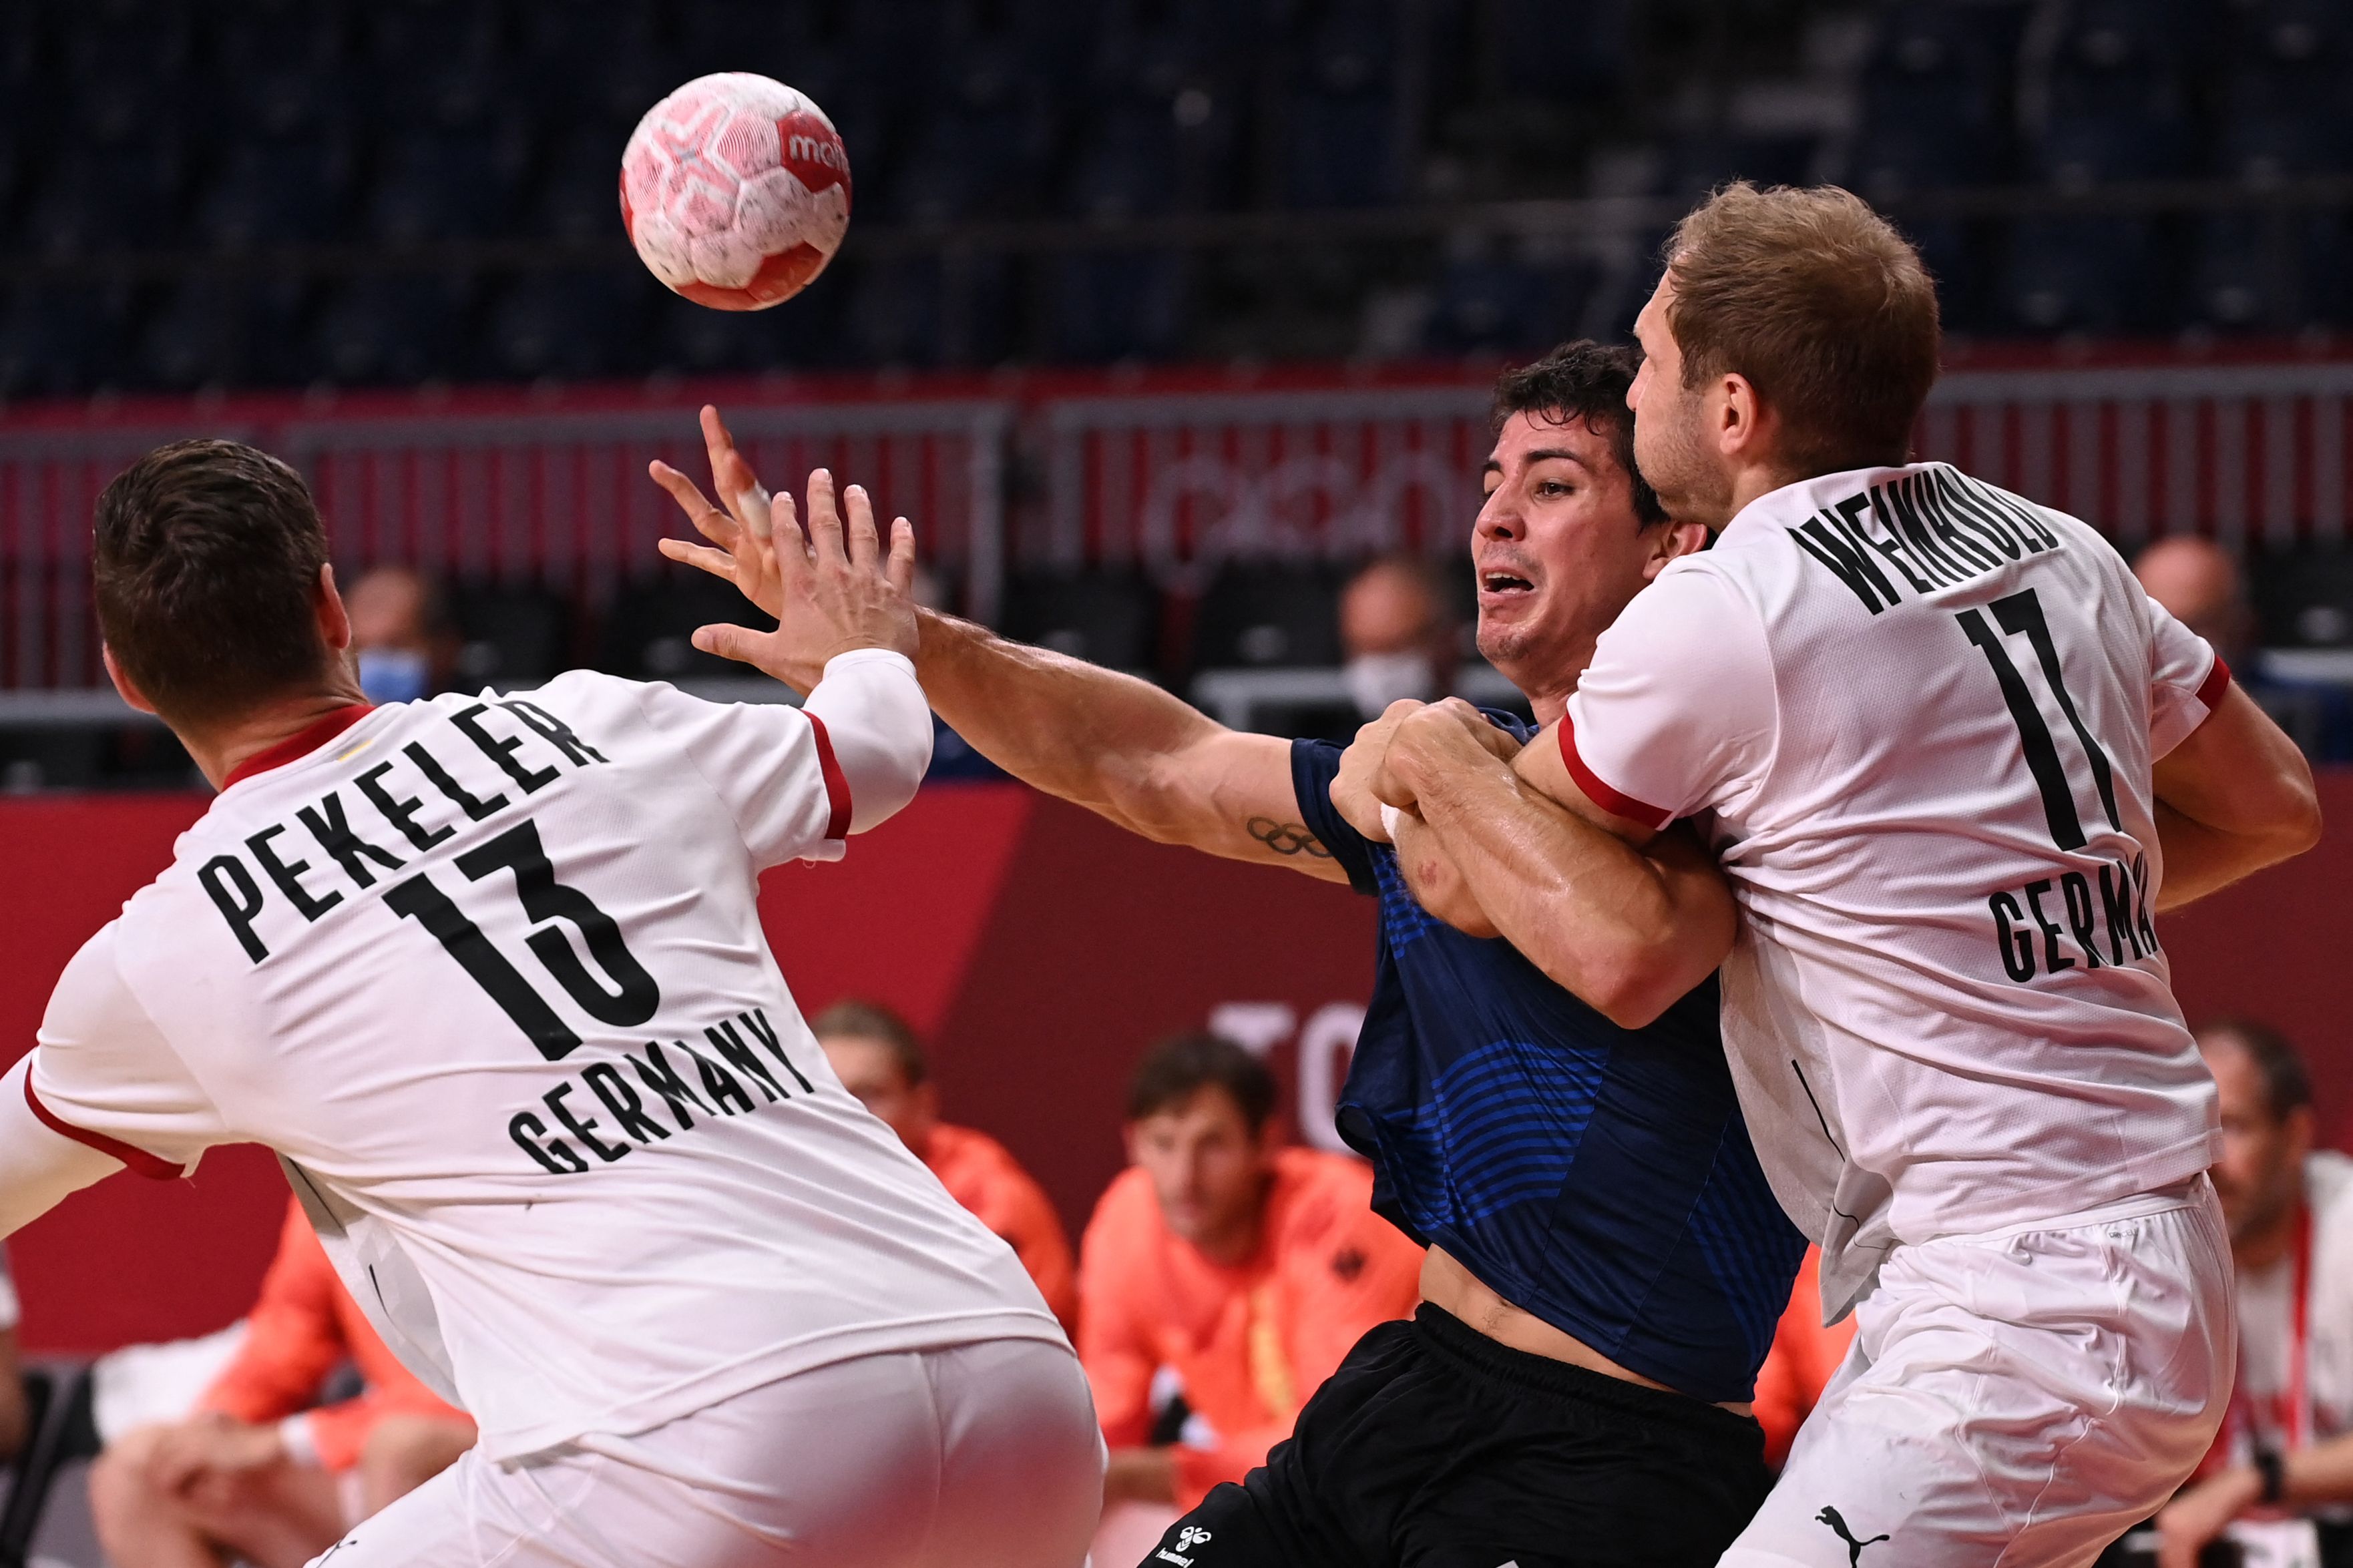 Argentina's centre back Diego Simonet (C) is challenged in the men's Preliminary Round Group A handball match between Argentina and Germany at the Tokyo Games